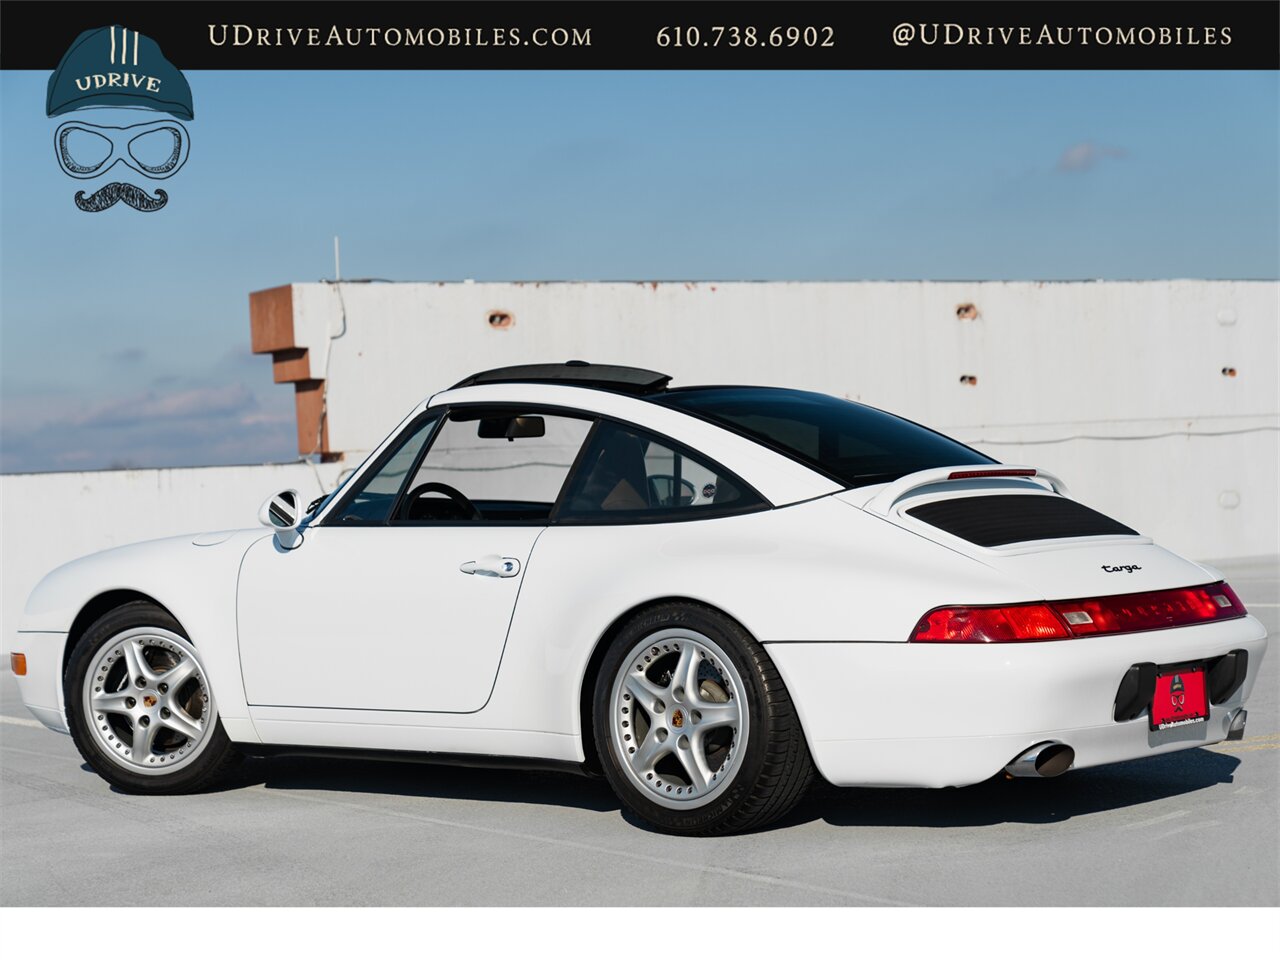 1998 Porsche 911 Carrera 993 Targa  1 of 122 Produced 6 Speed $10k Recent Service Engine Reseal - Photo 4 - West Chester, PA 19382